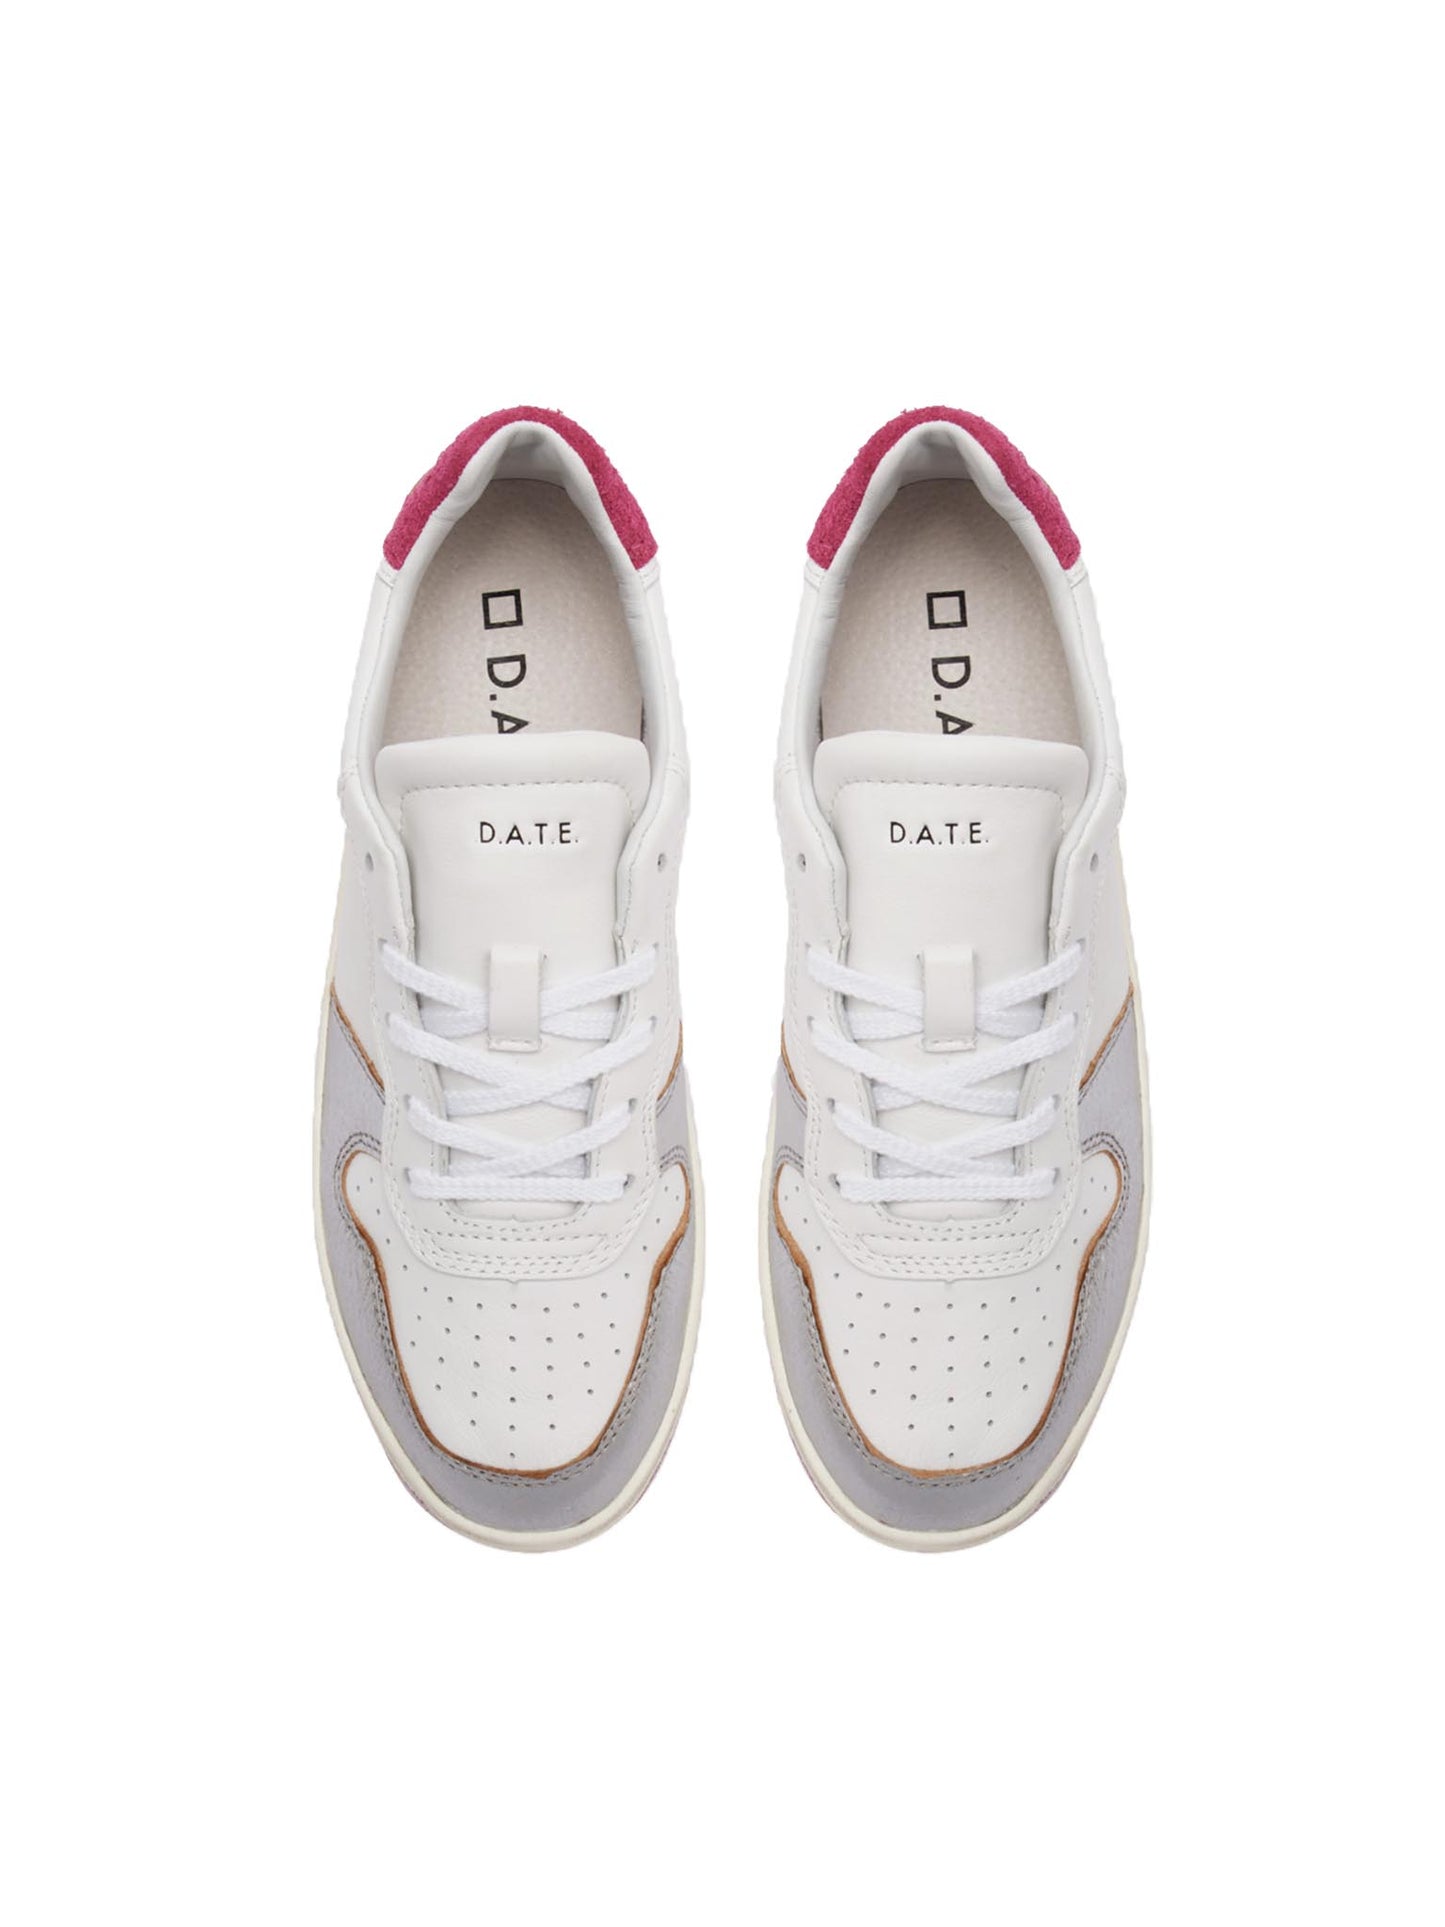 D.A.T.E Court Laminated White-Silver Trainers Cutout from Top